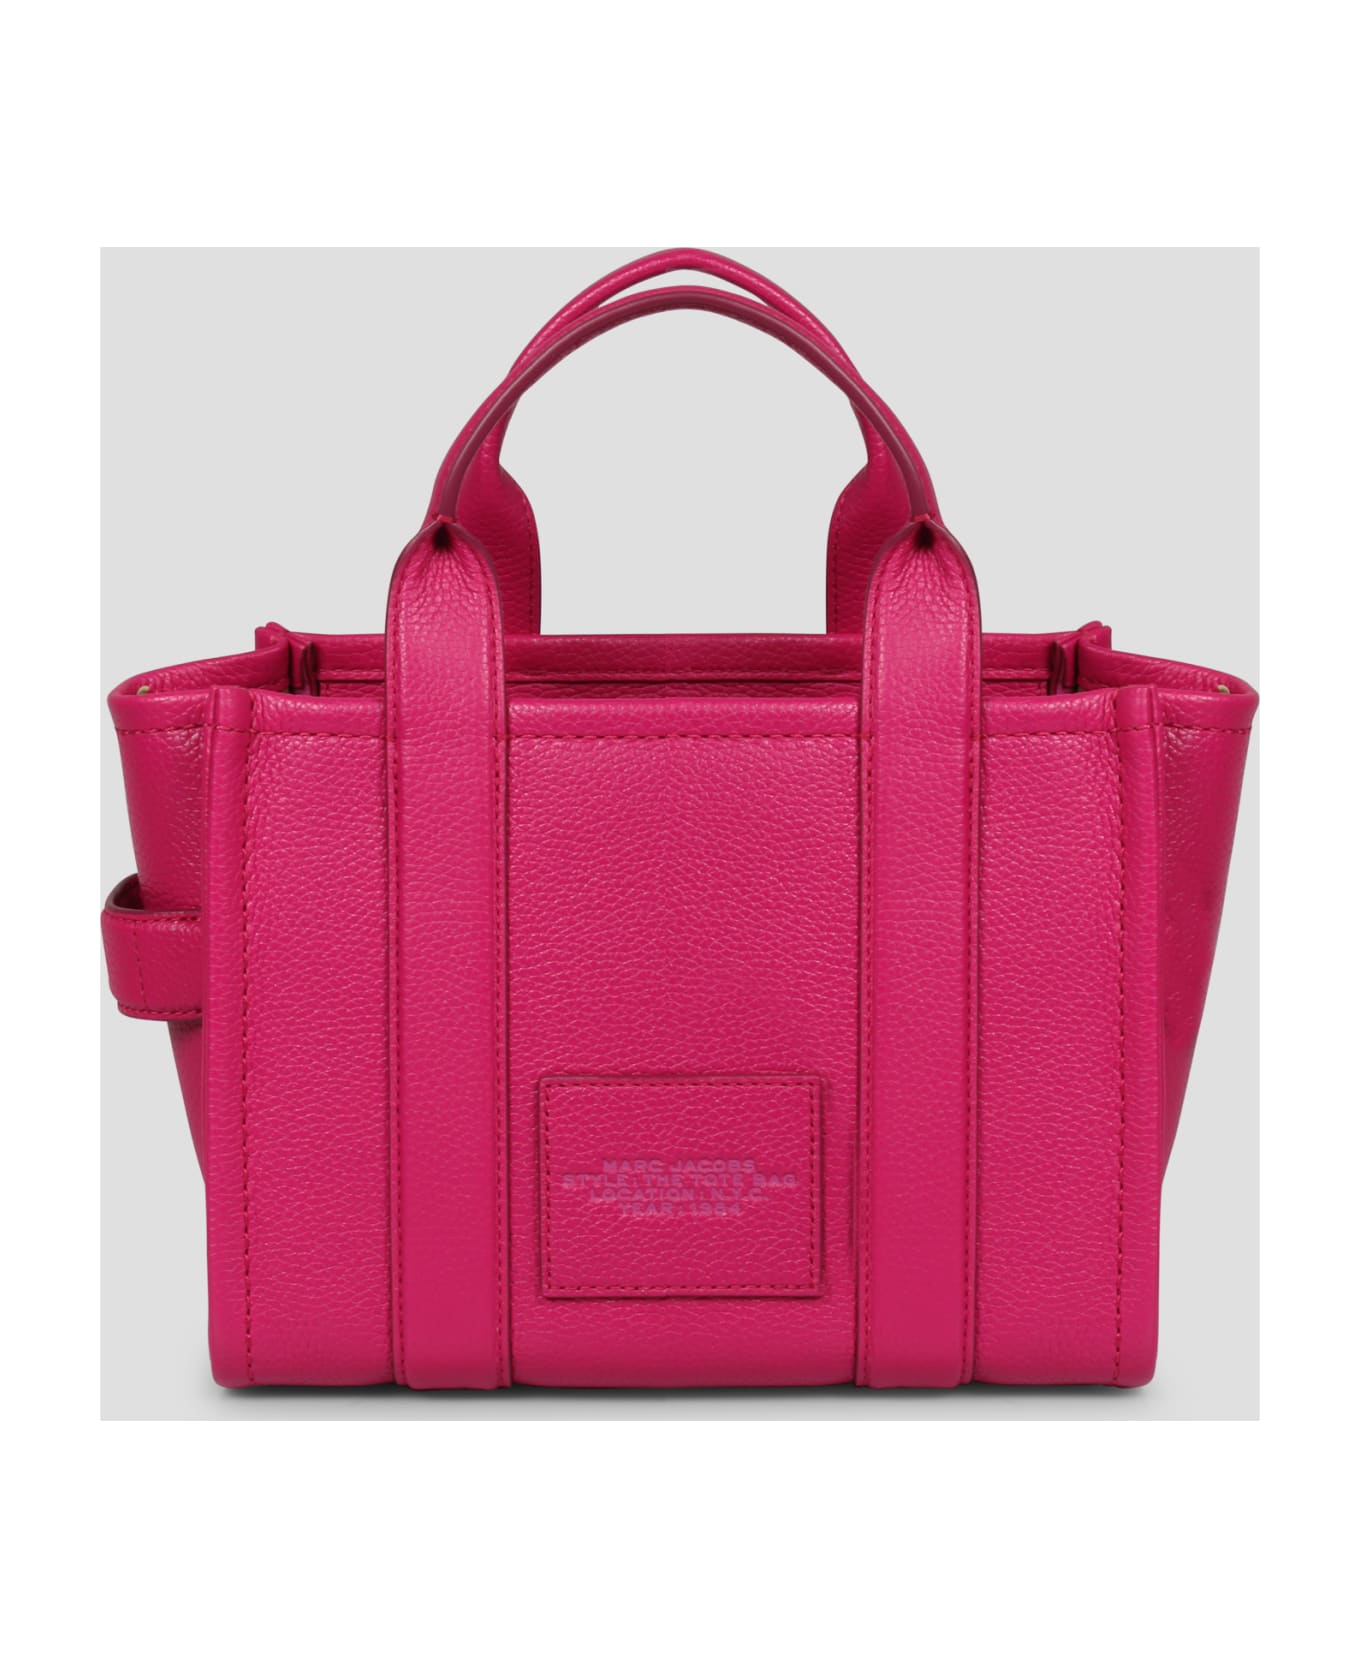 Marc Jacobs The Leather Small Tote Bag - Pink & Purple トートバッグ